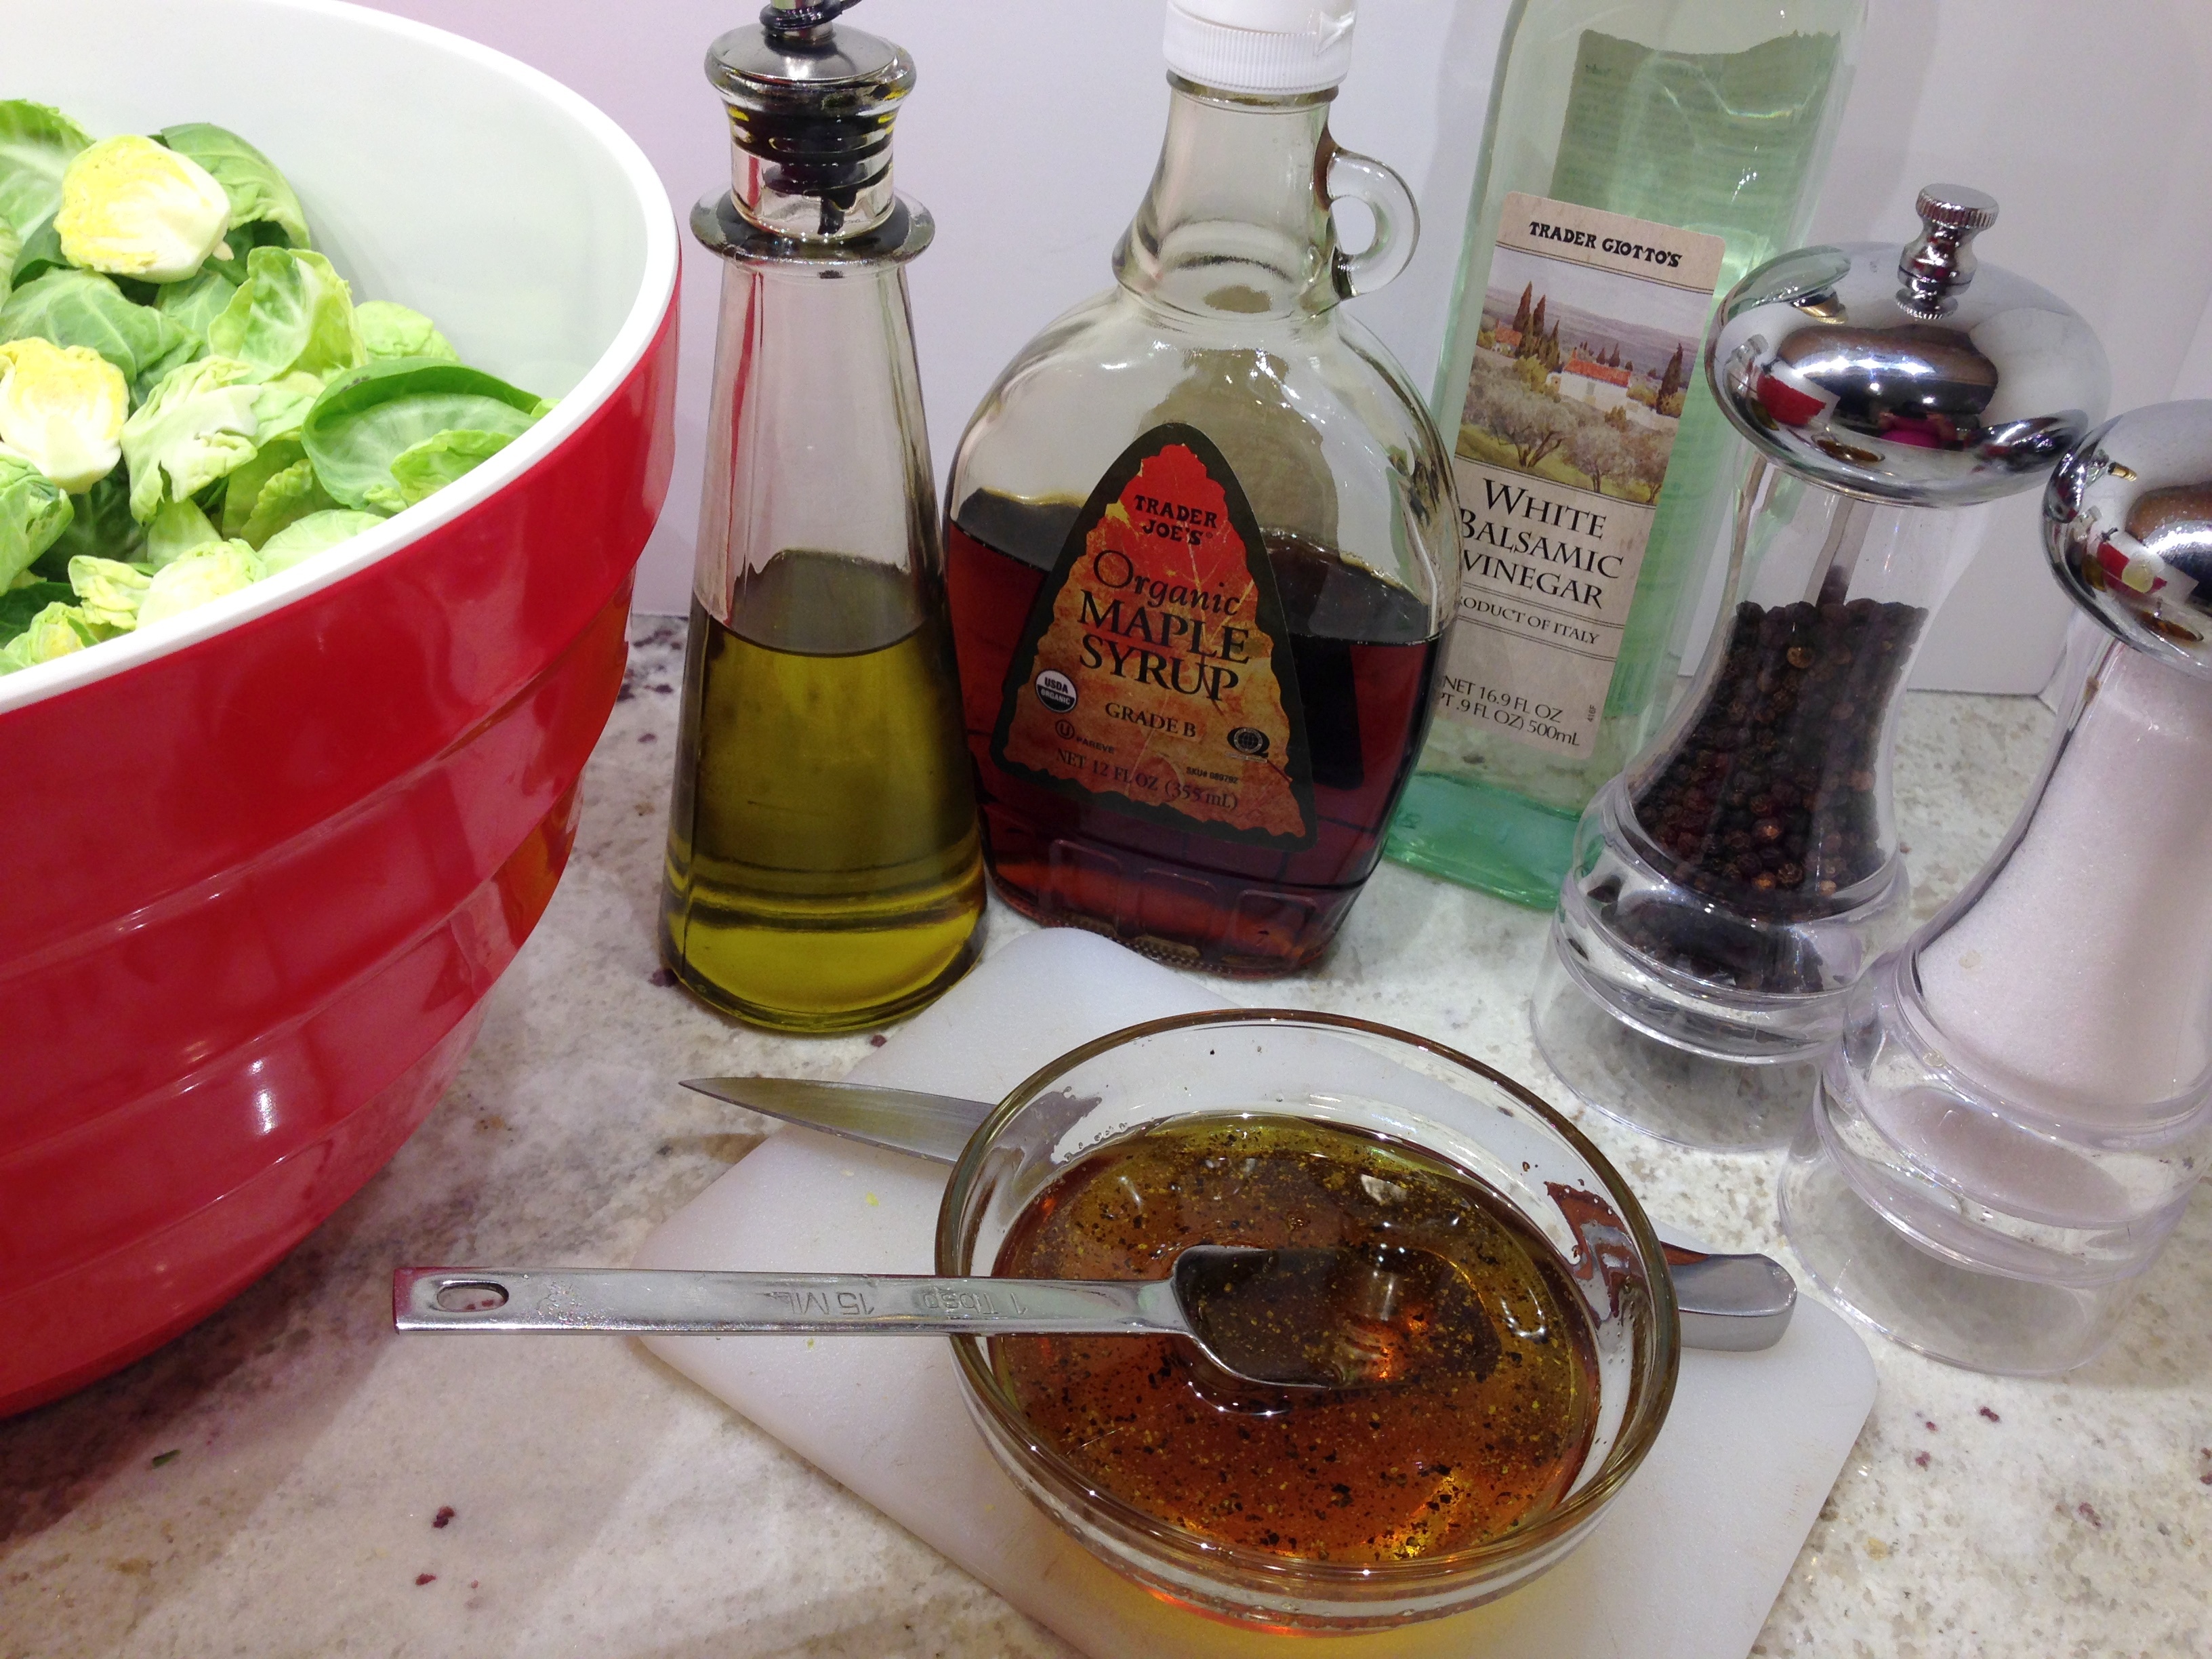 Brussels sprout marinade